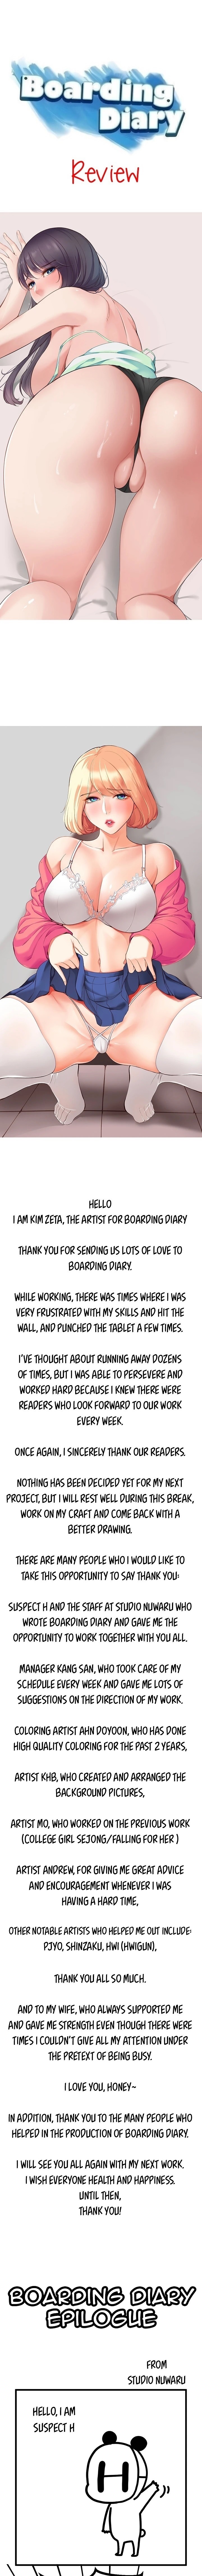 Boarding Diary - Page 1